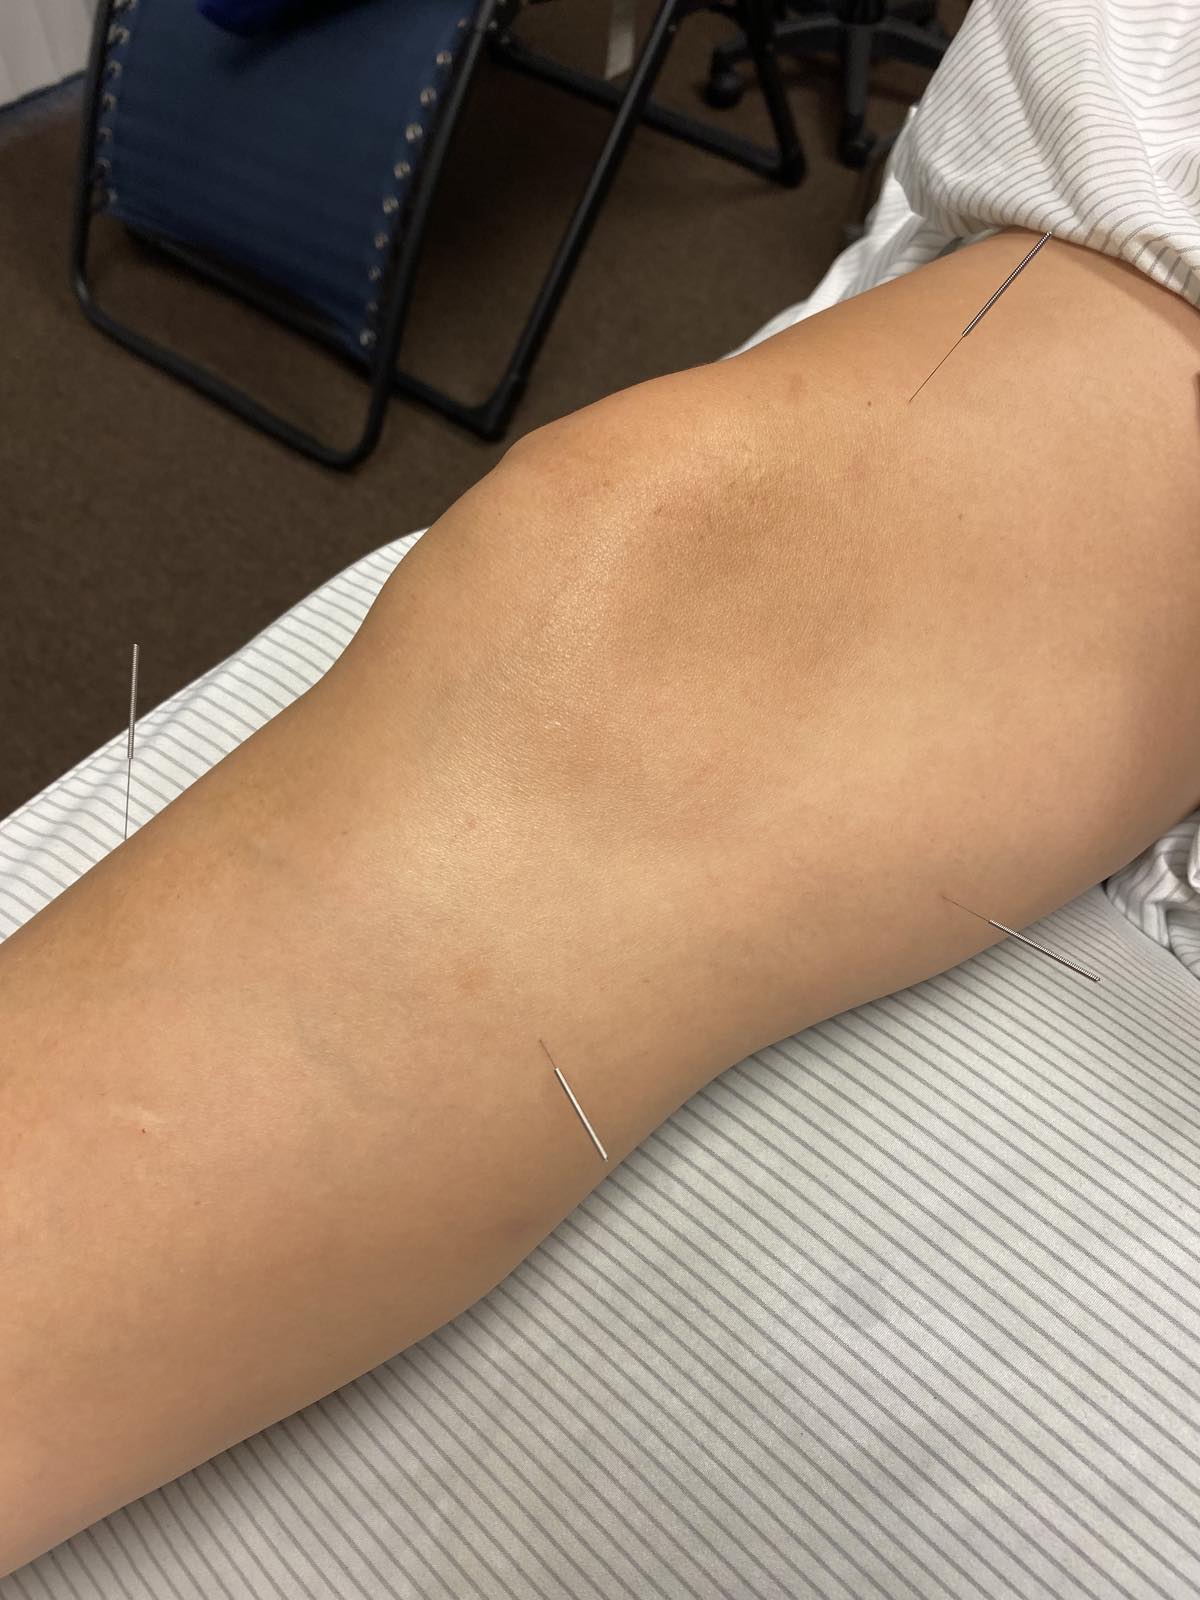 Acupuncture legs two